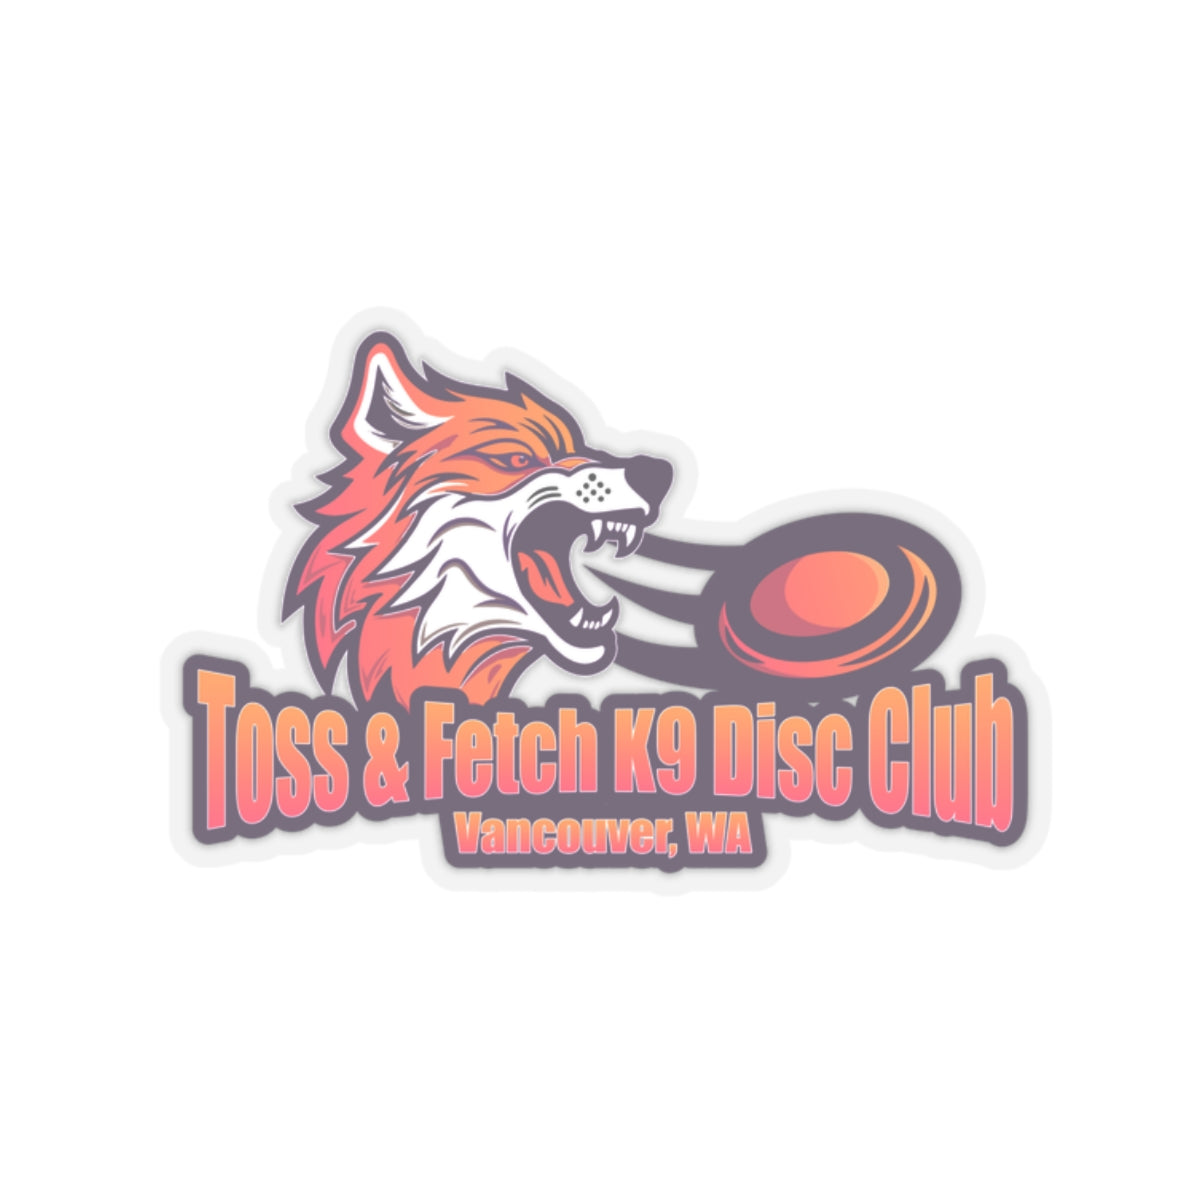 Toss & Fetch - Vancouver, WA  Stickers